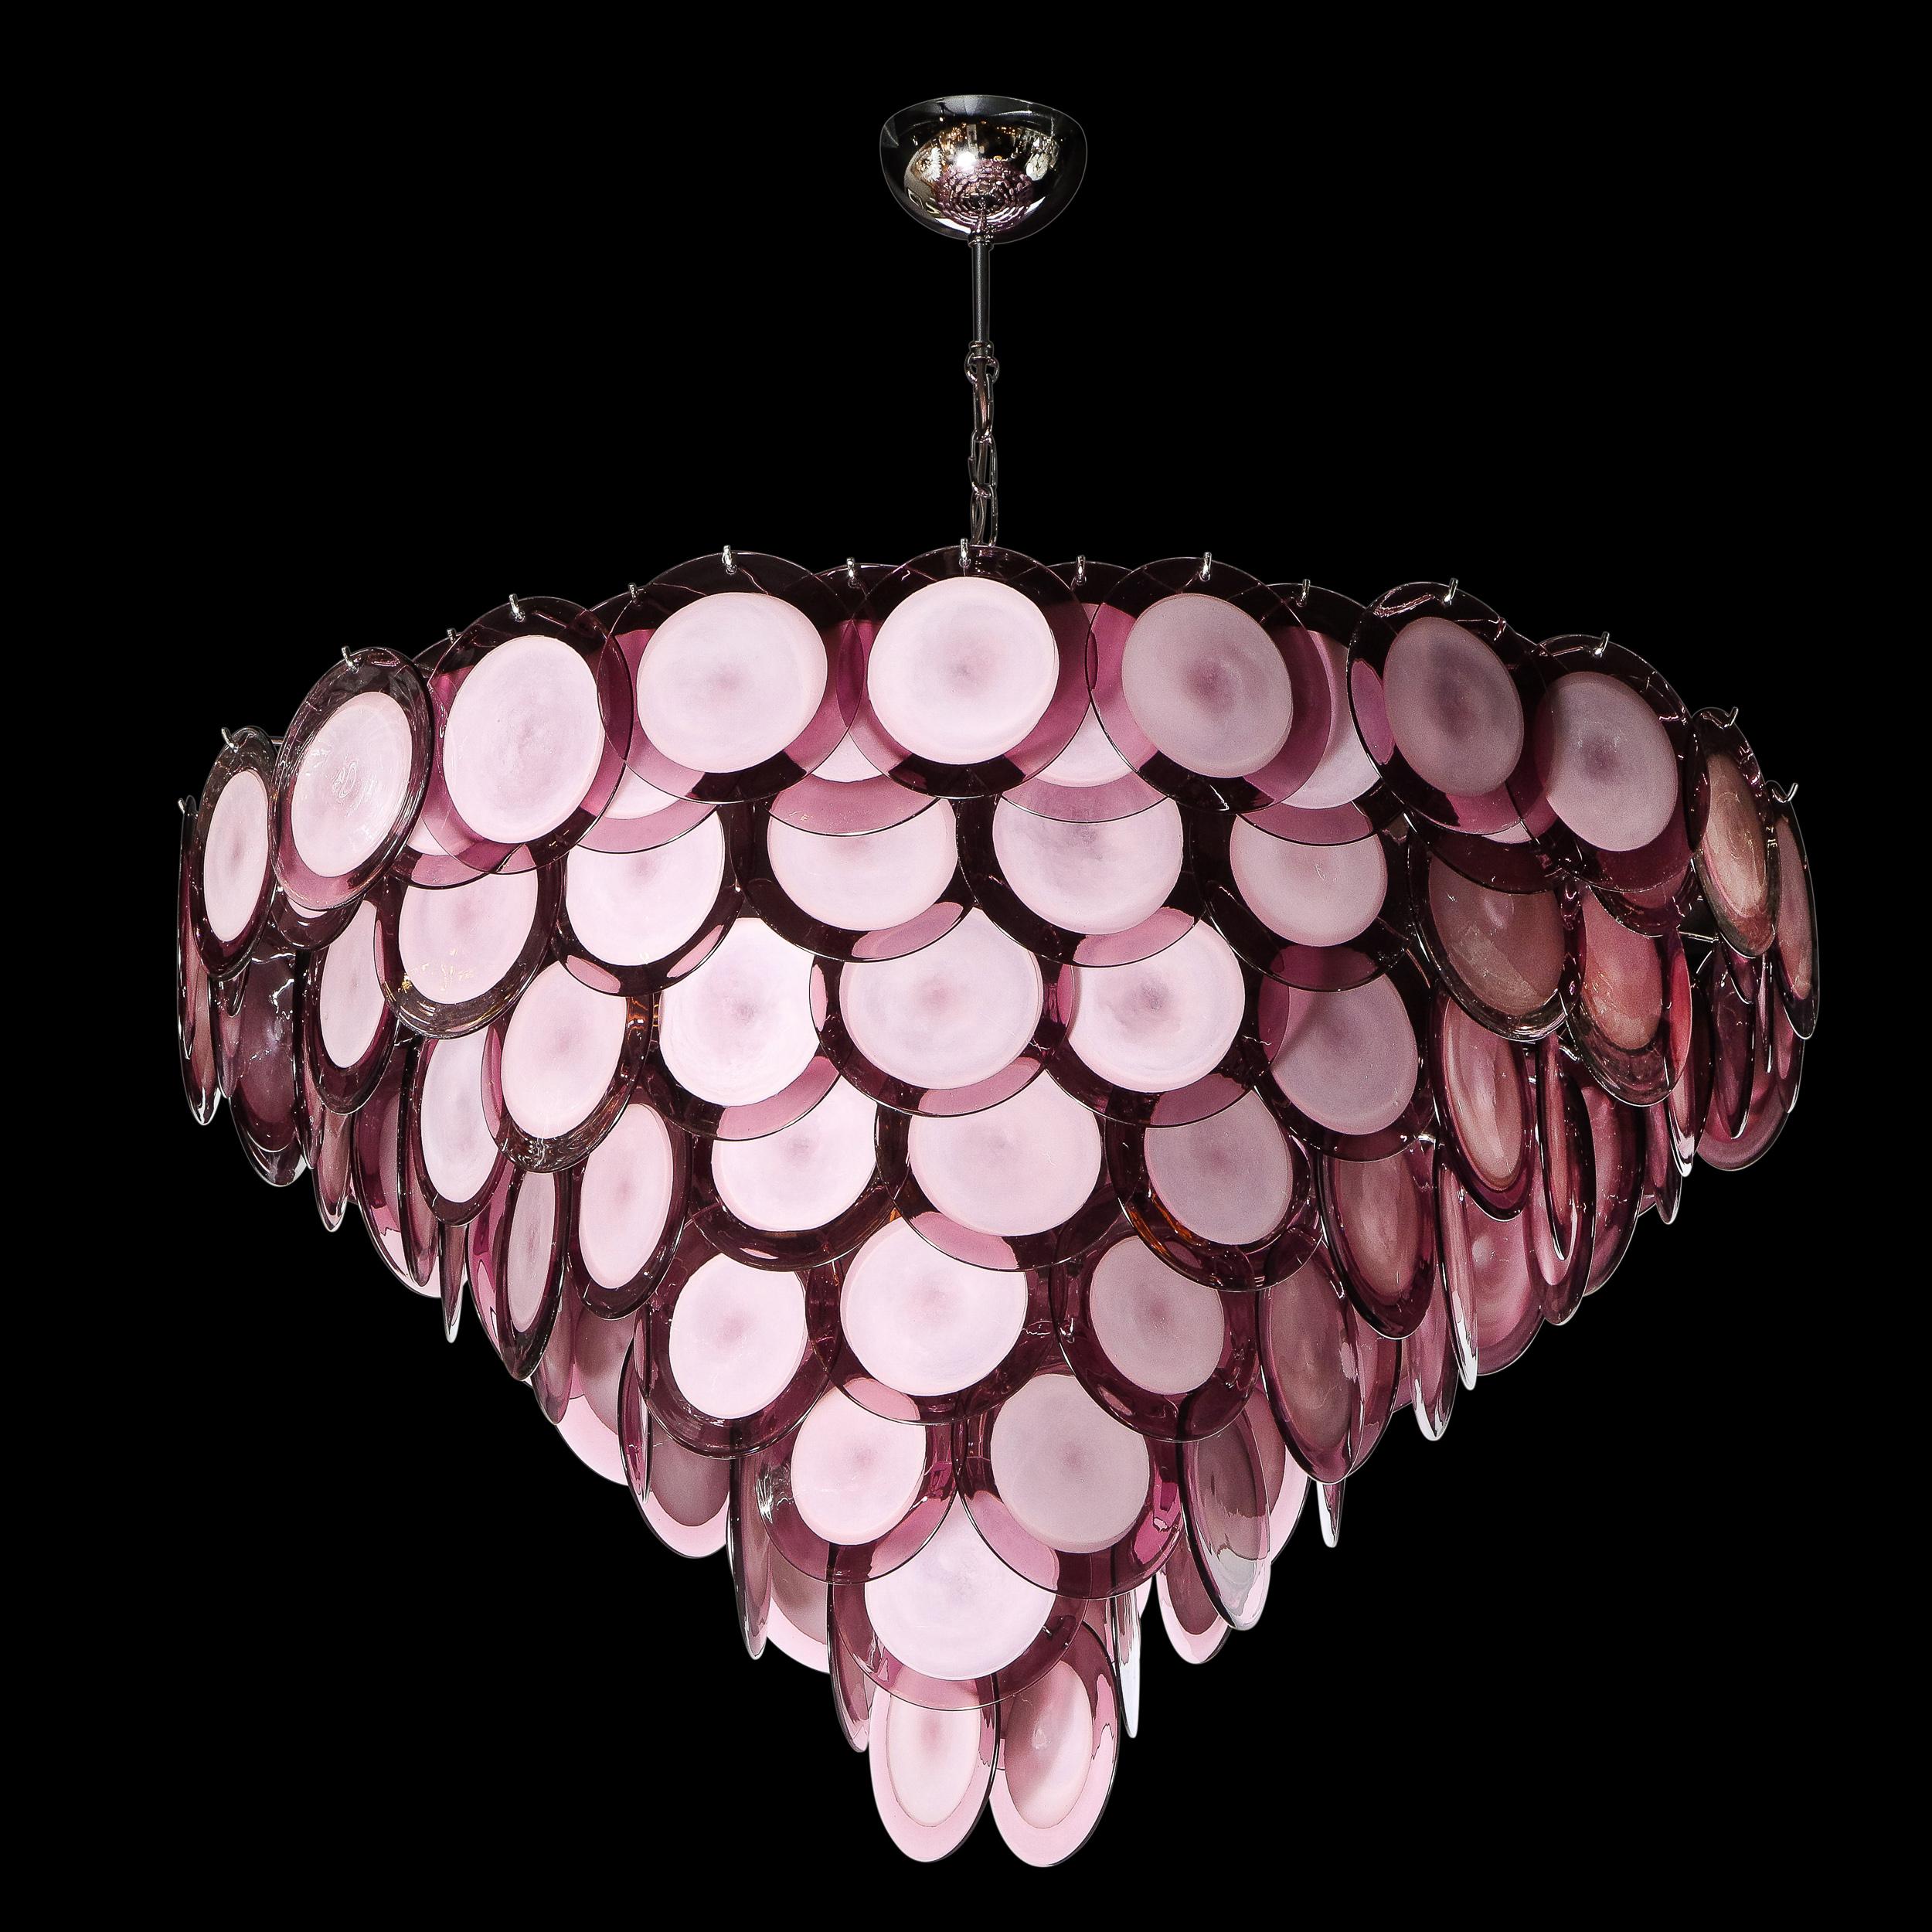 Modernist Eight Tier Amethyst Handblown Murano Chandelier with Chrome Fittings For Sale 3